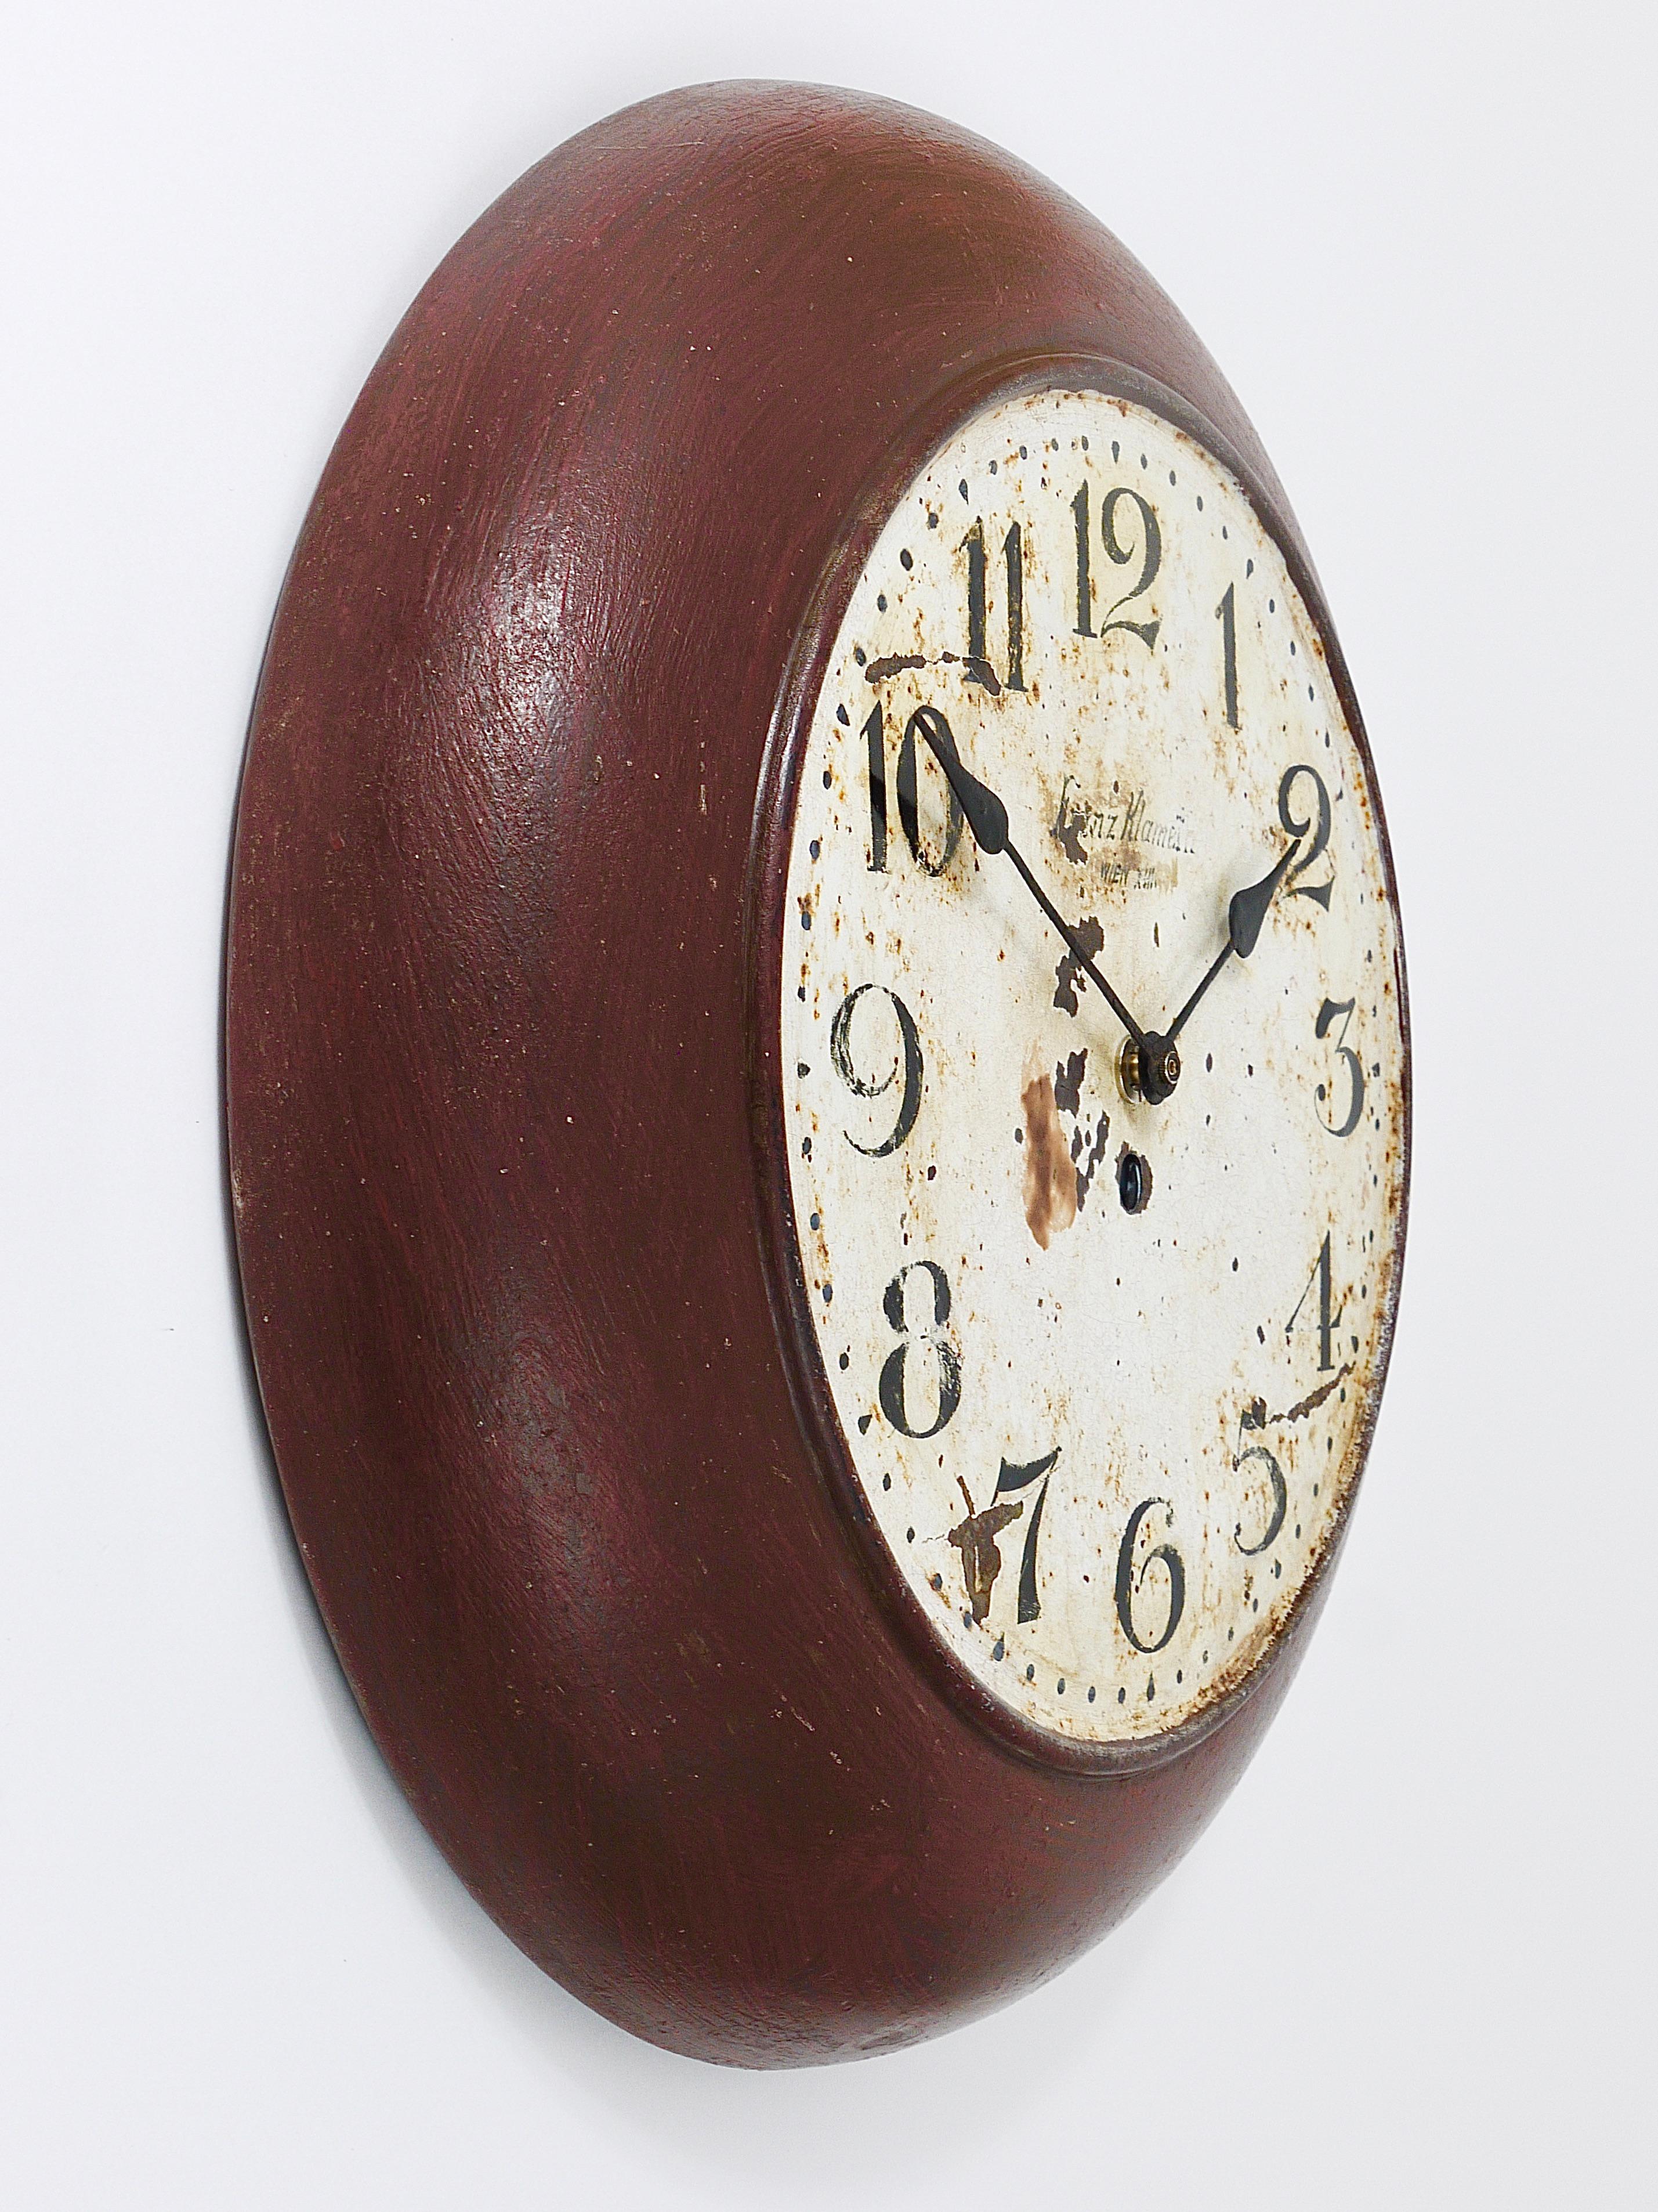 Antique 1920s Public Iron Wall Clock With Hand-Painted Dial, Industrial Style For Sale 4